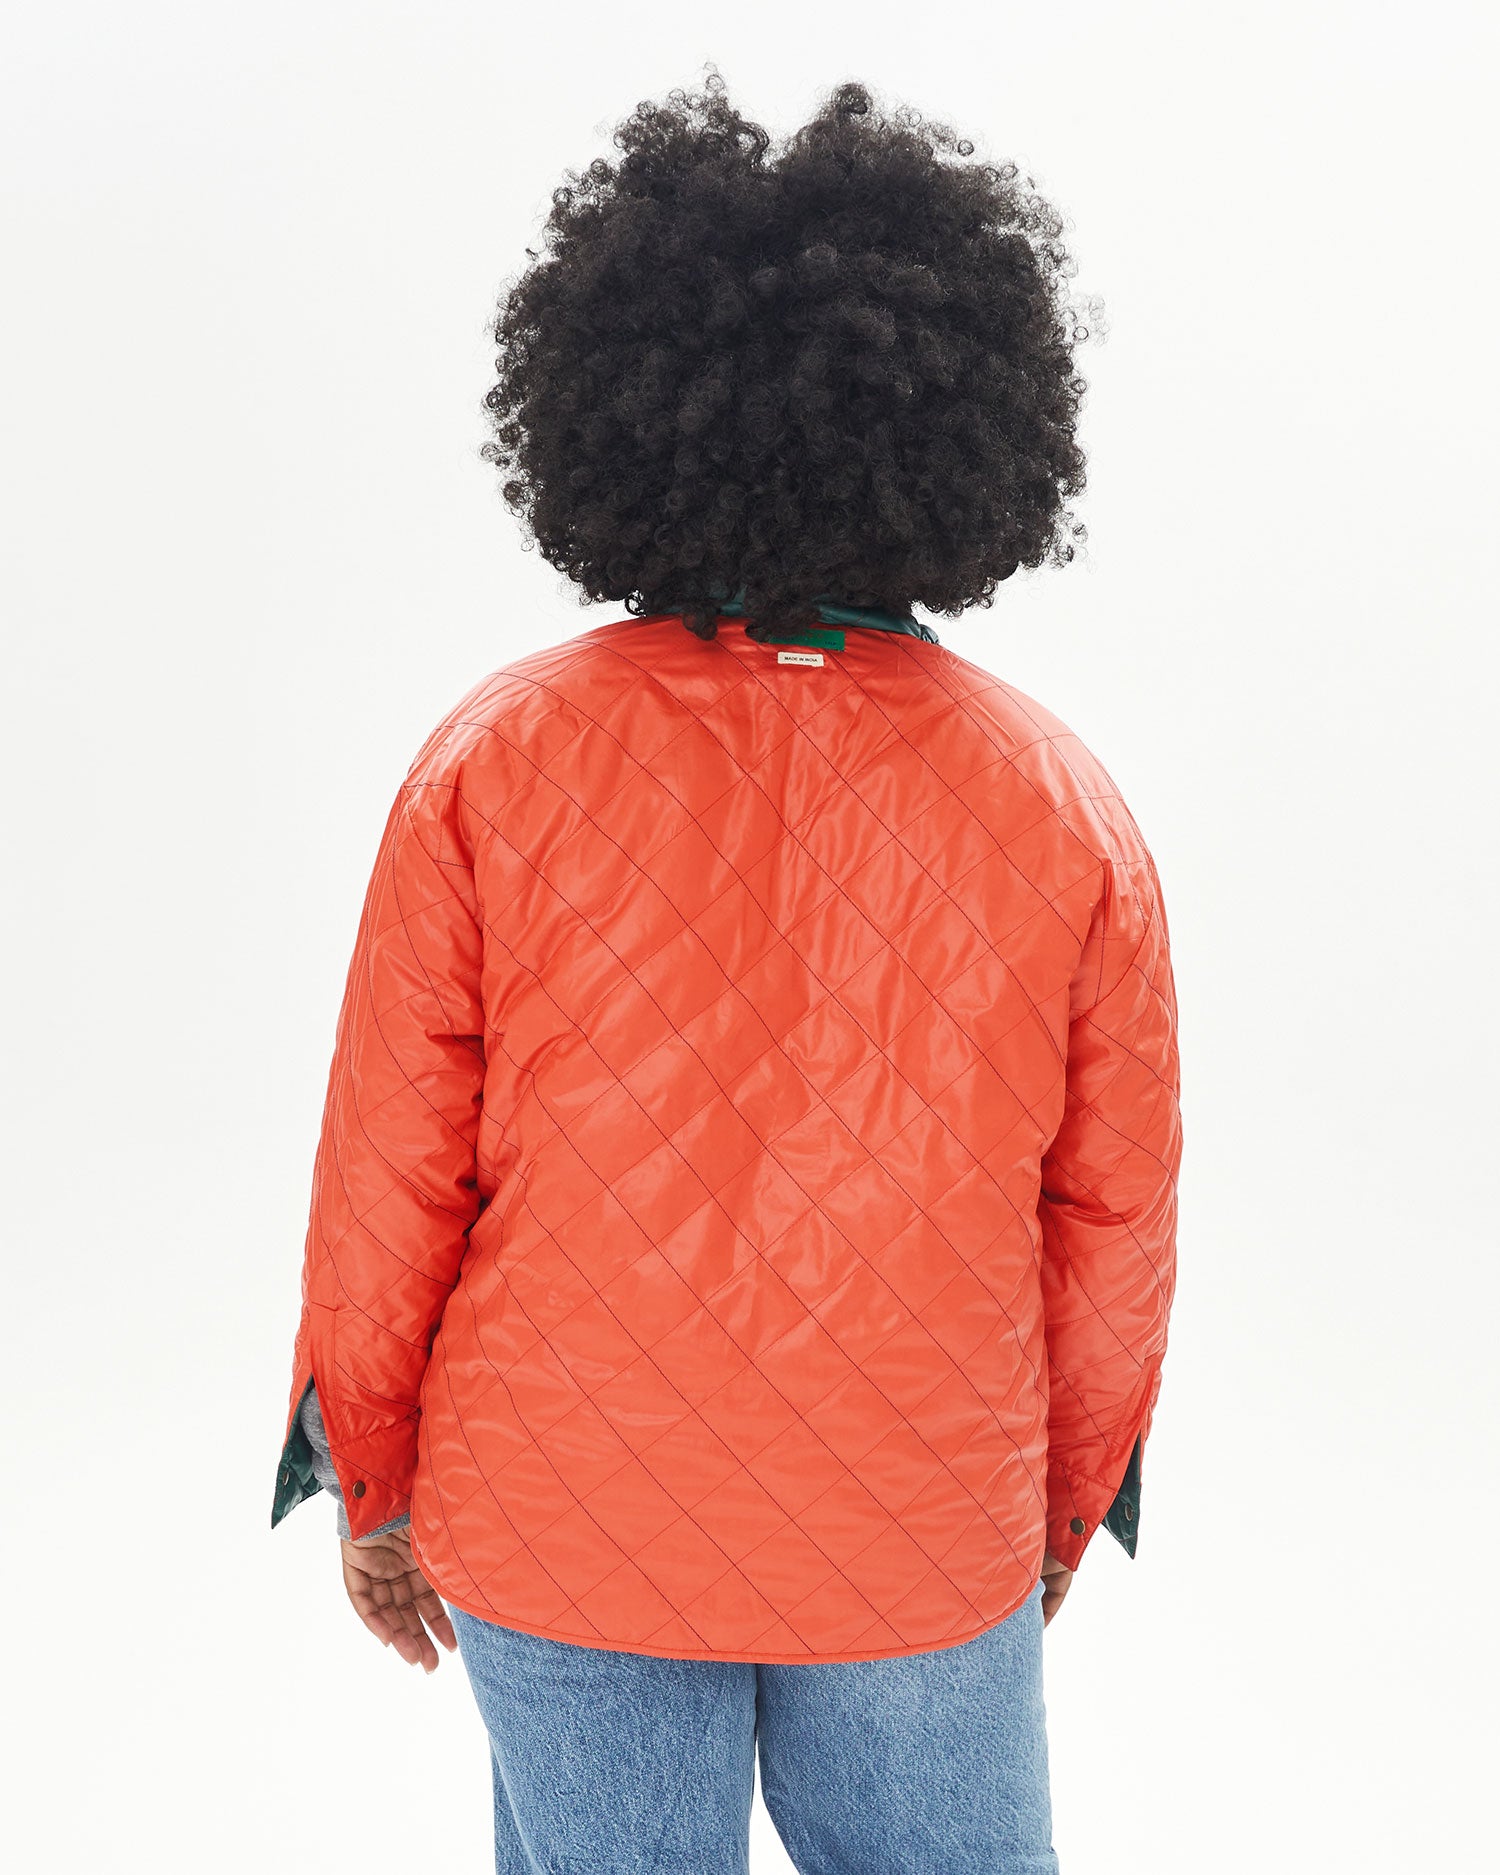 back view of Candice in the Spruce & Poppy Quilted Nylon Jacque Jacket with the poppy side facing outwards